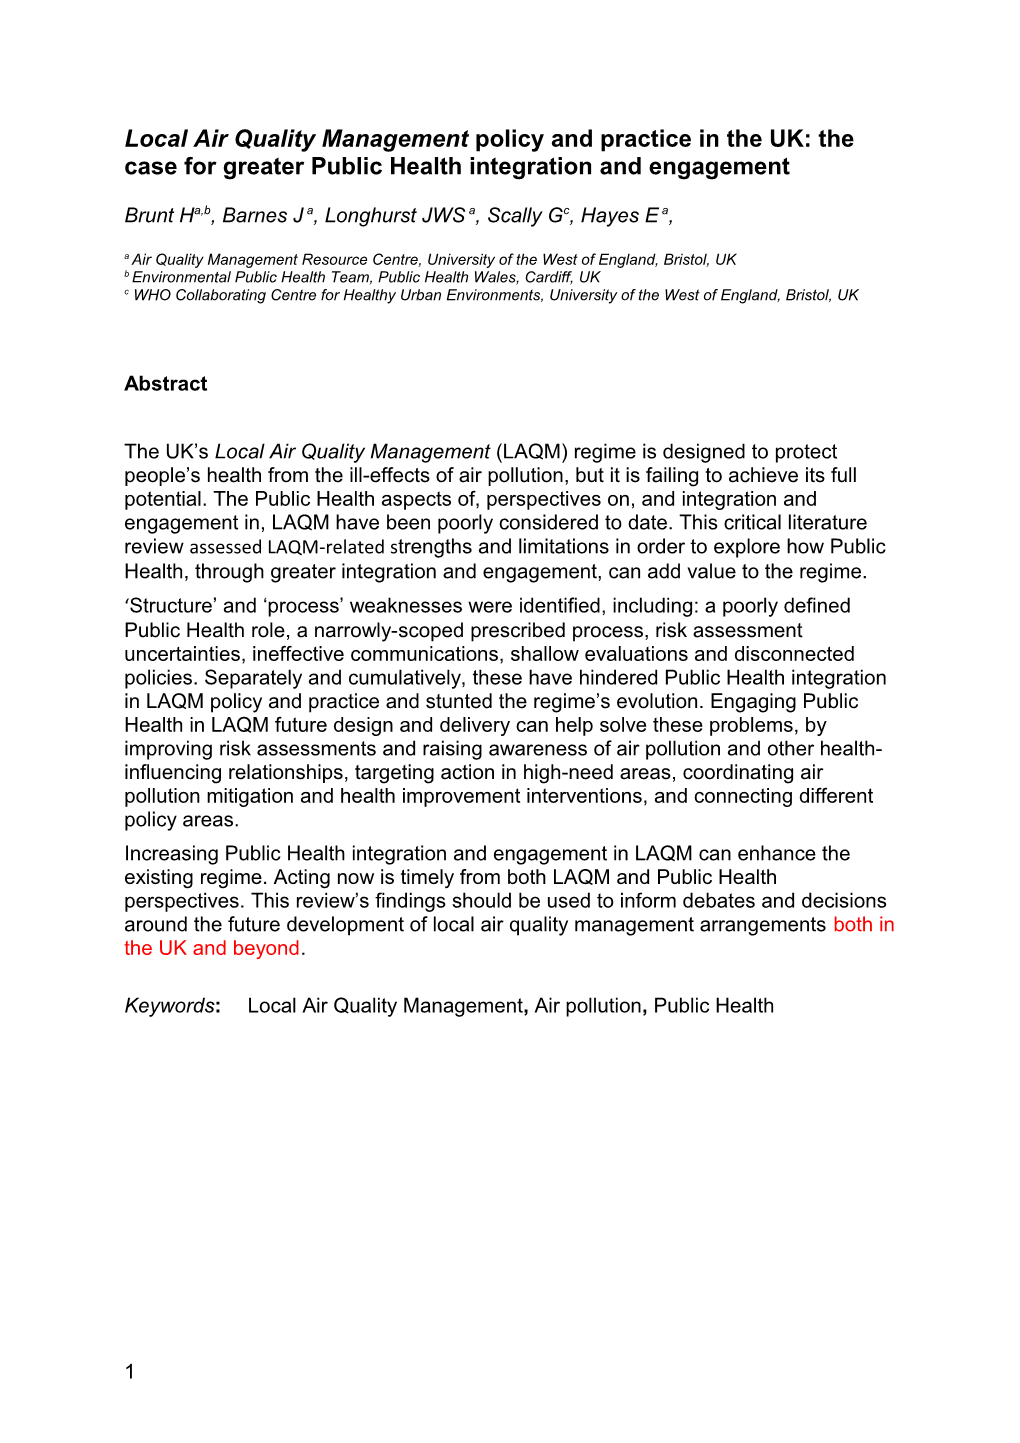 Local Air Quality Management Policy and Practice in the UK: the Case for Greater Public